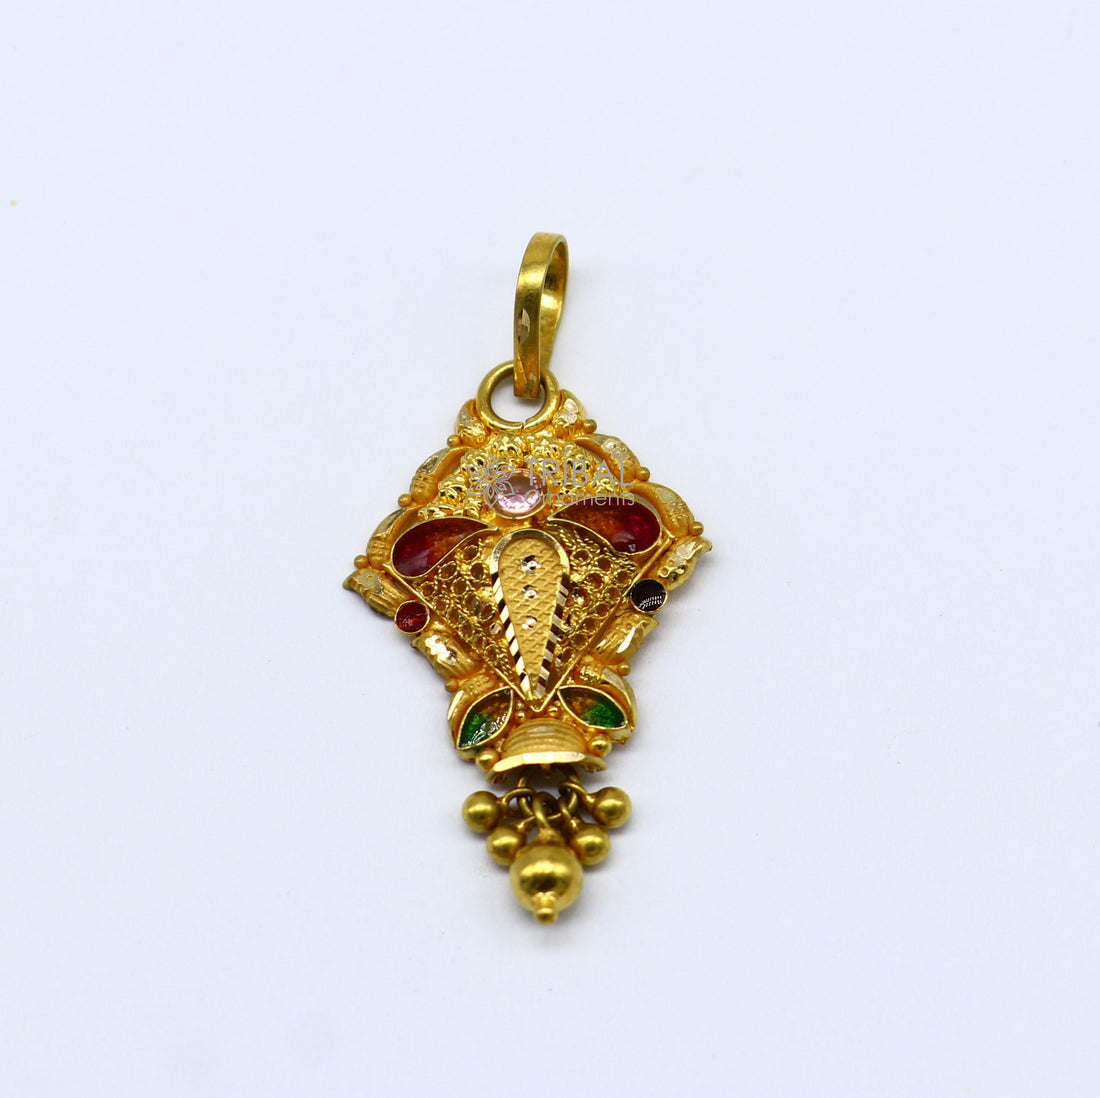 Traditional cultural filigree work trendy 22kt yellow gold functional pendant, amazing ethnic brides pendant jewelry gp28 - TRIBAL ORNAMENTS